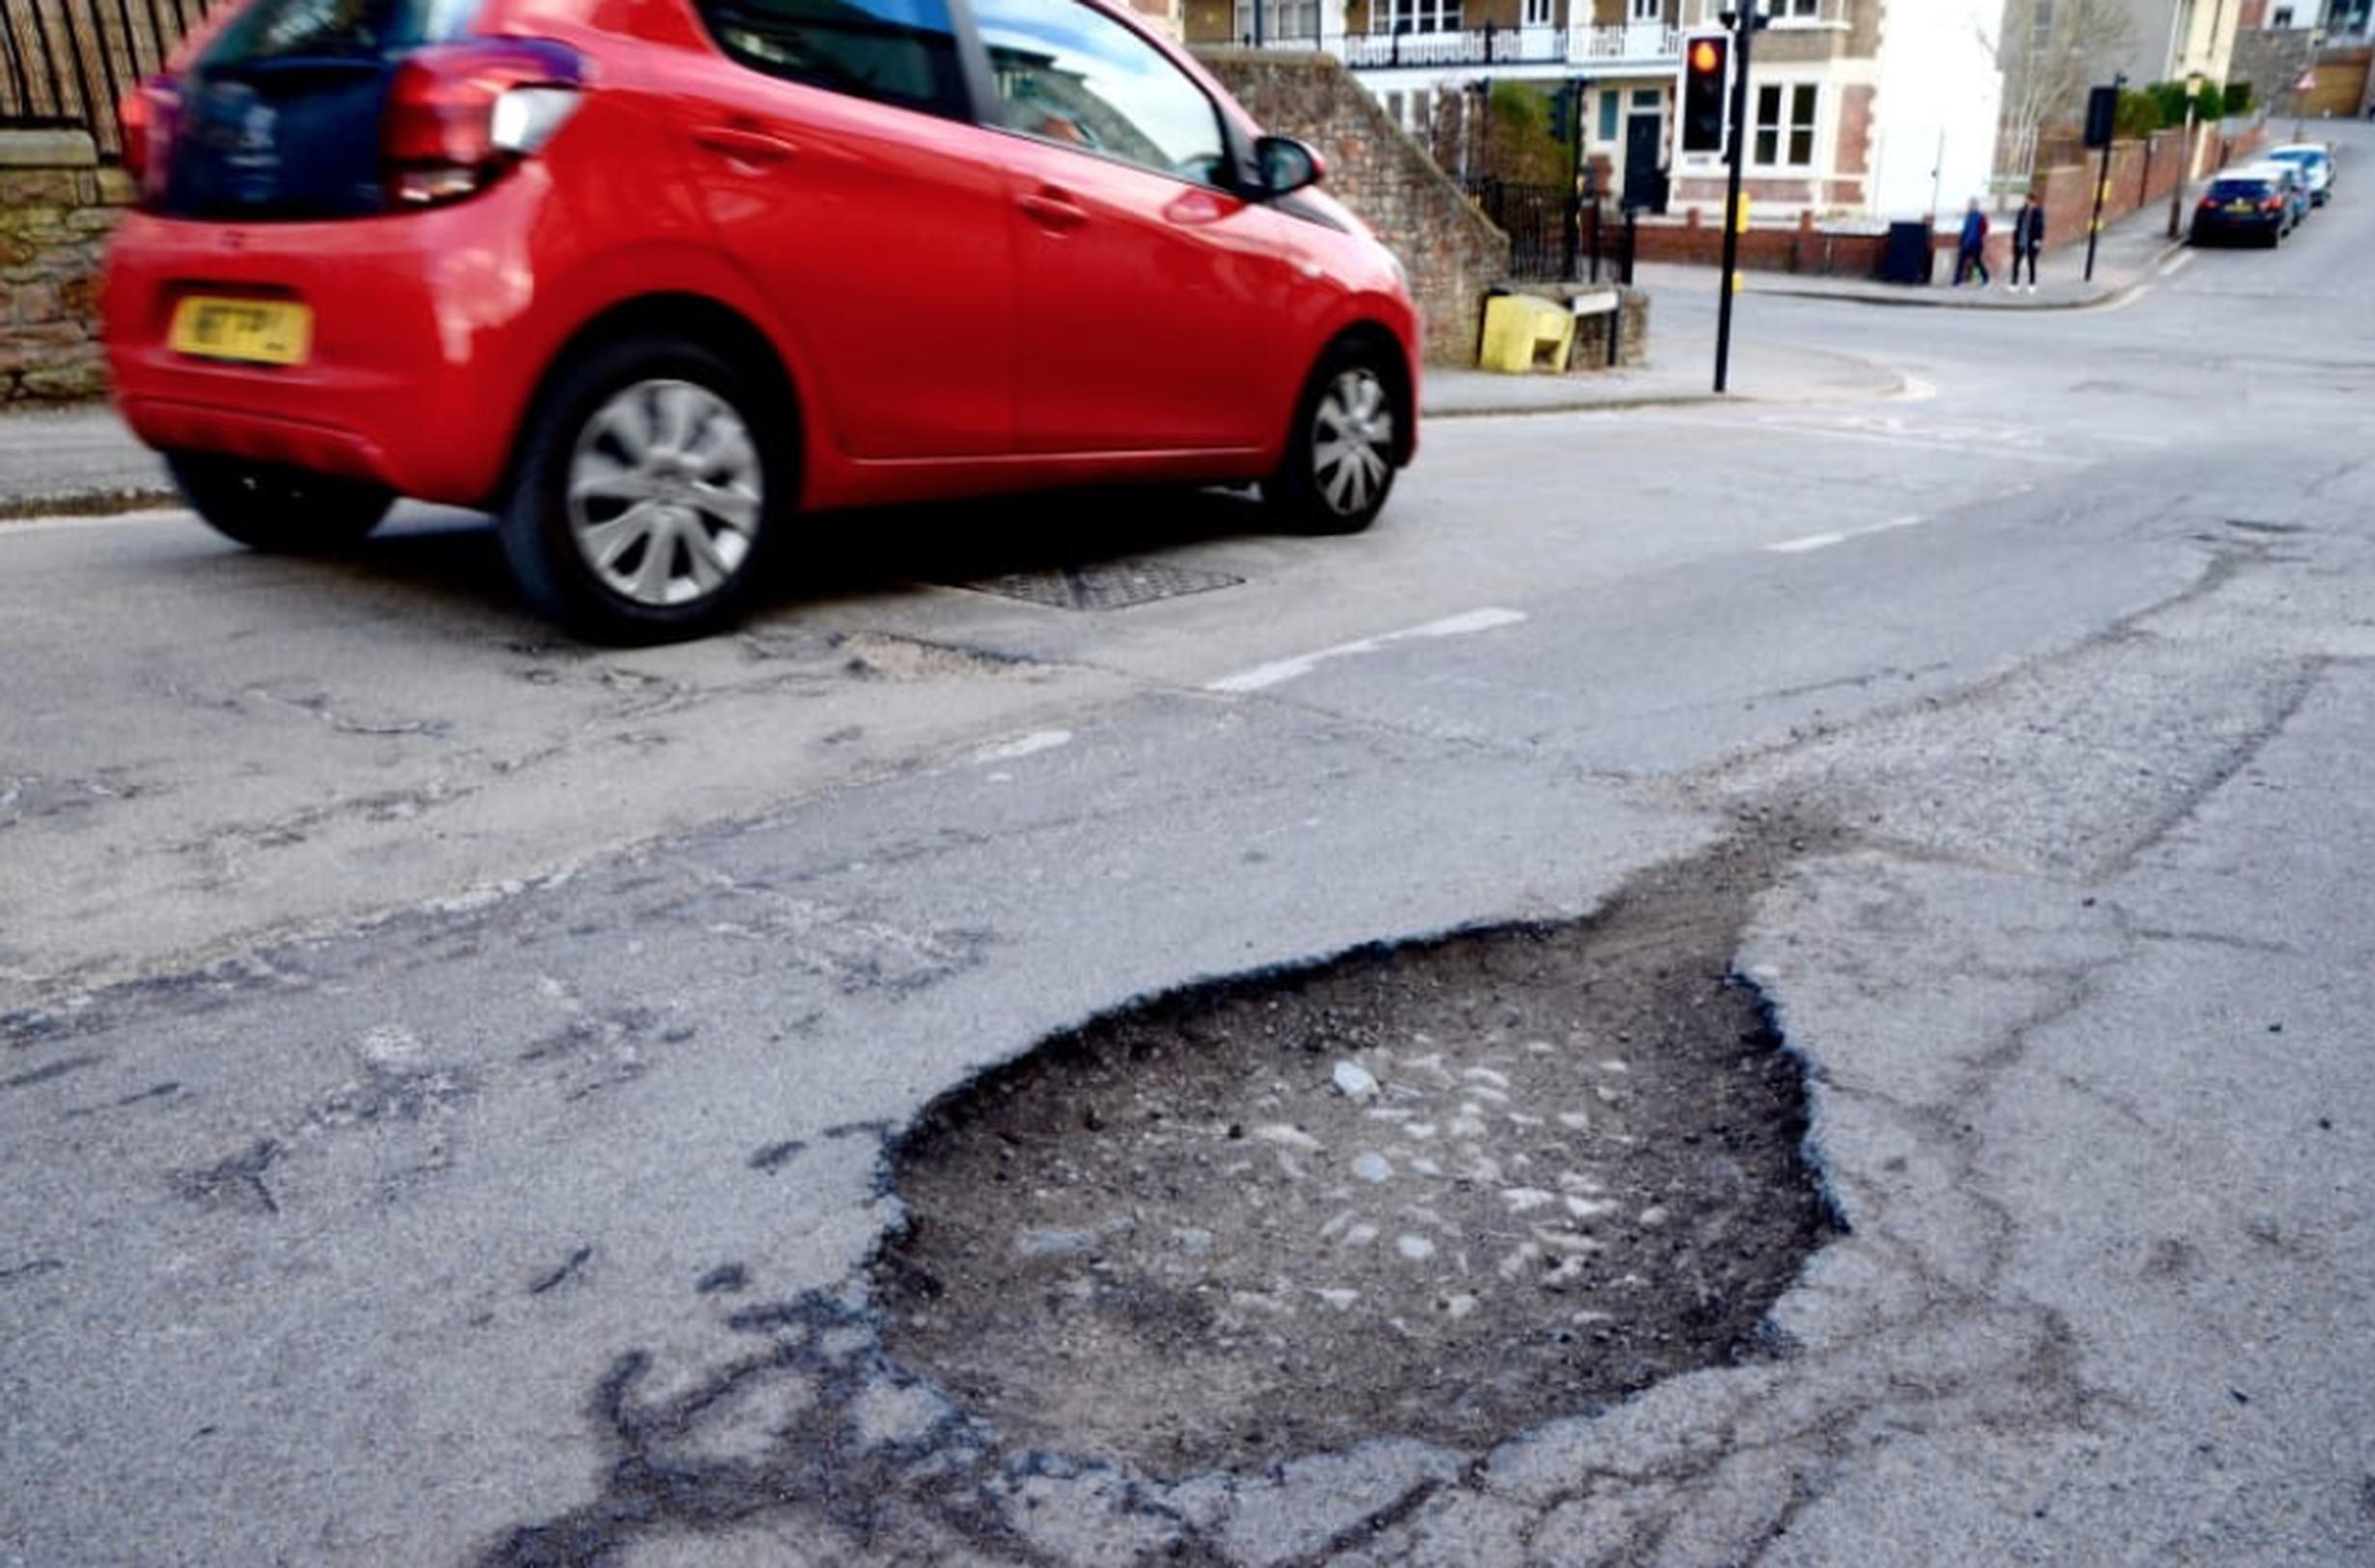 The Department for Transport will work with Gaist, a highway data and mapping company, businesses such as Deliveroo, Uber, Tesco and Ocado, alongside local highway authorities to identify ‘pothole hotspots`